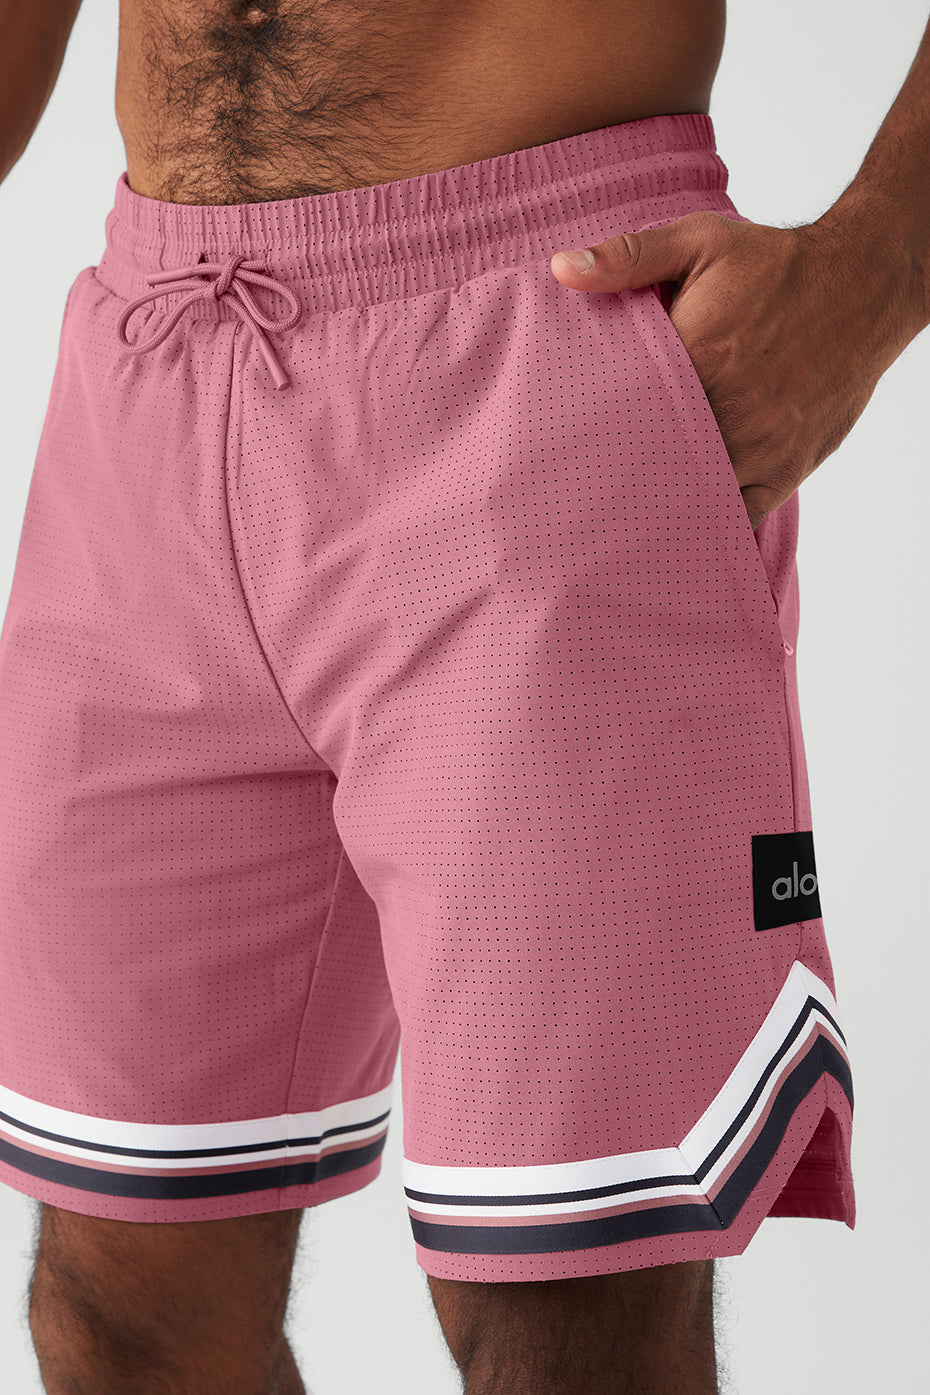 9' Traction Arena Short - Mars Clay